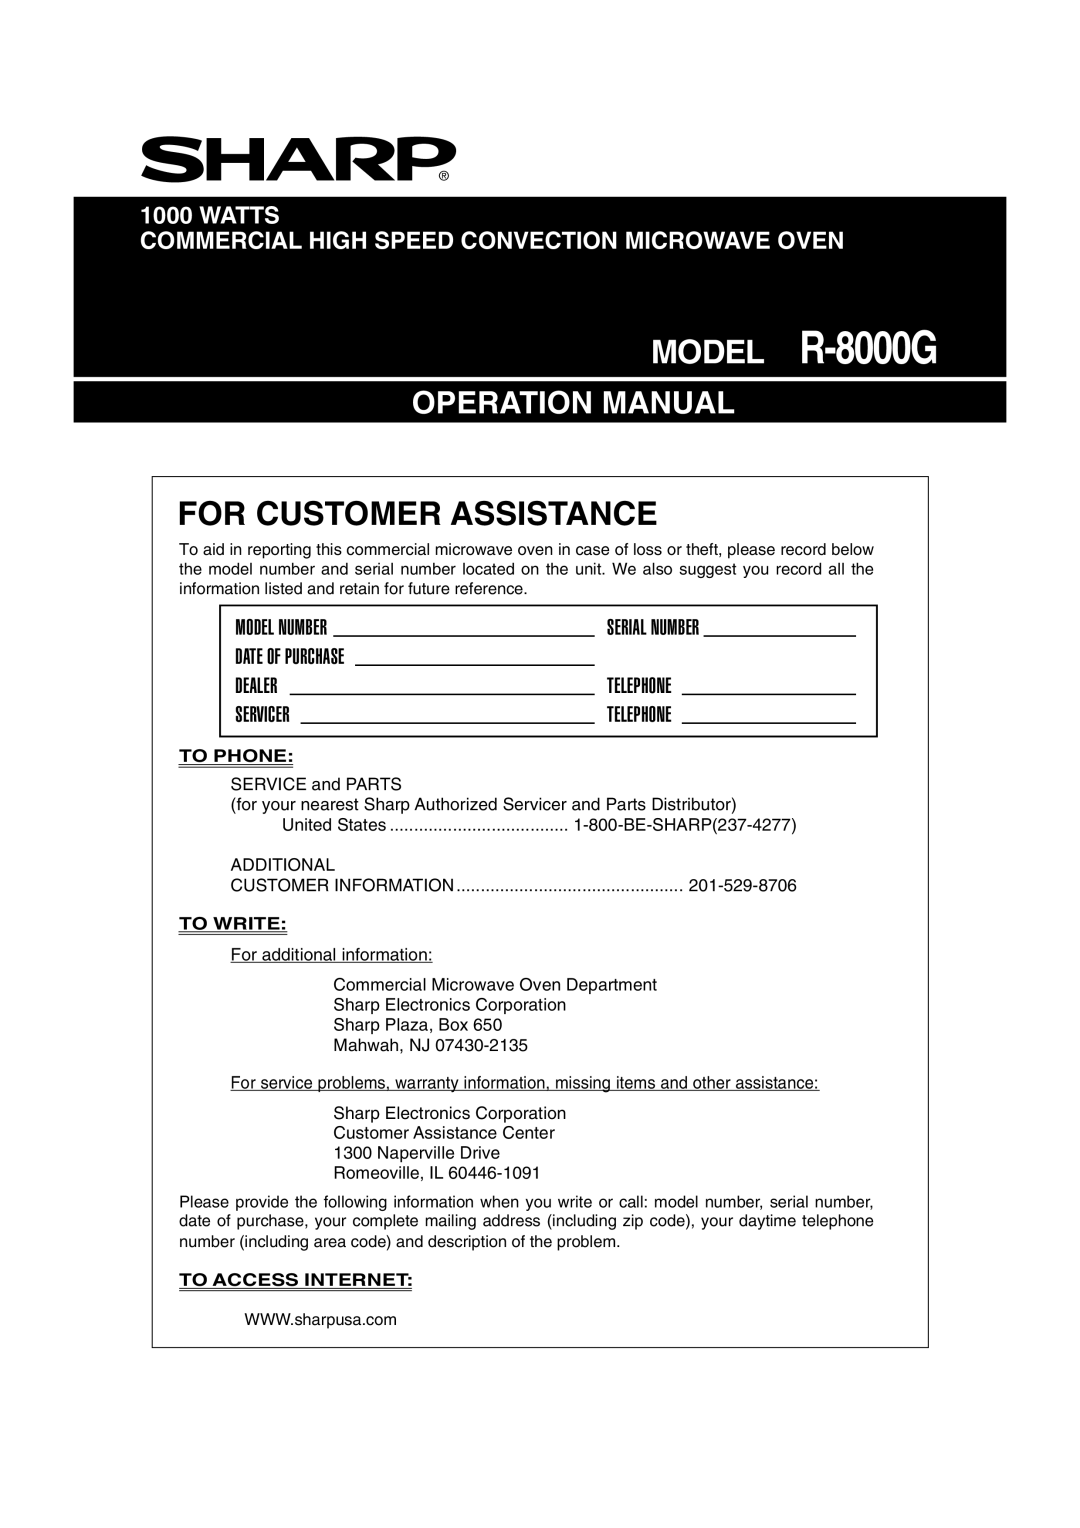 Sharp operation manual MODEL R-8000G, For Customer Assistance, Operation Manual, To Phone, To Write, To Access Internet 